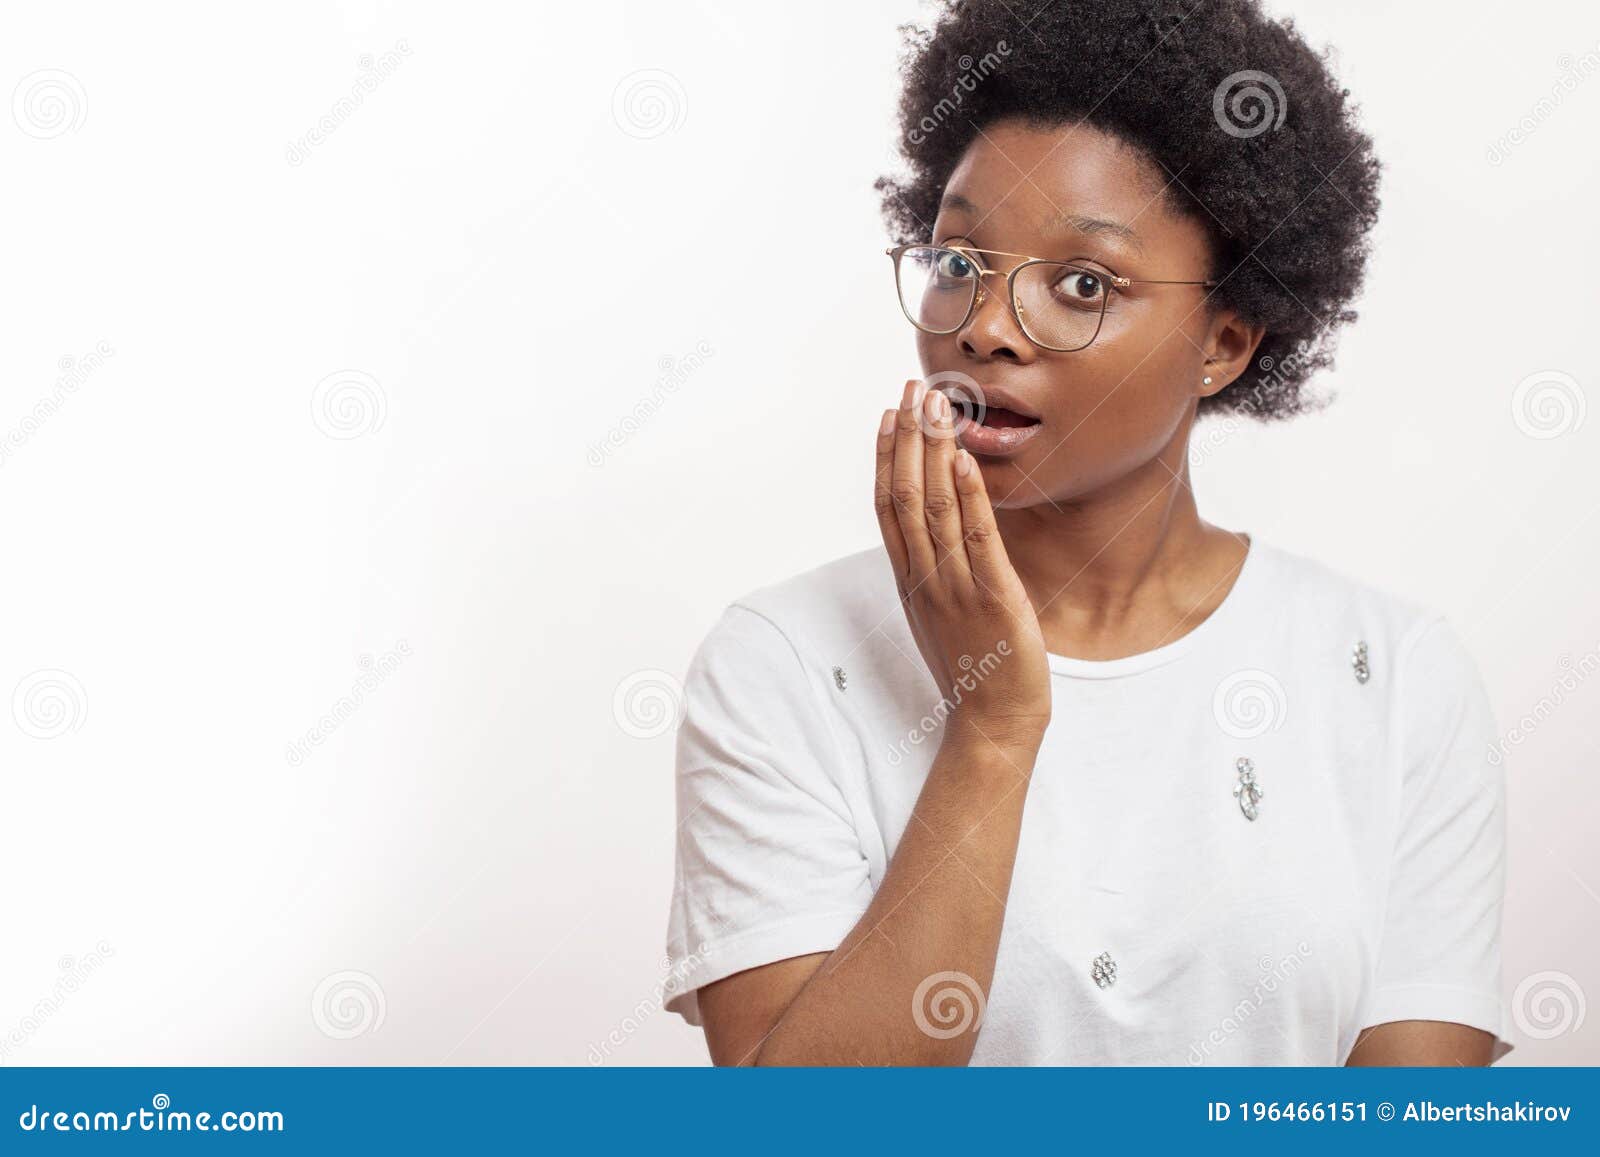 africanamerican woman trying to close her mouth while sneezing